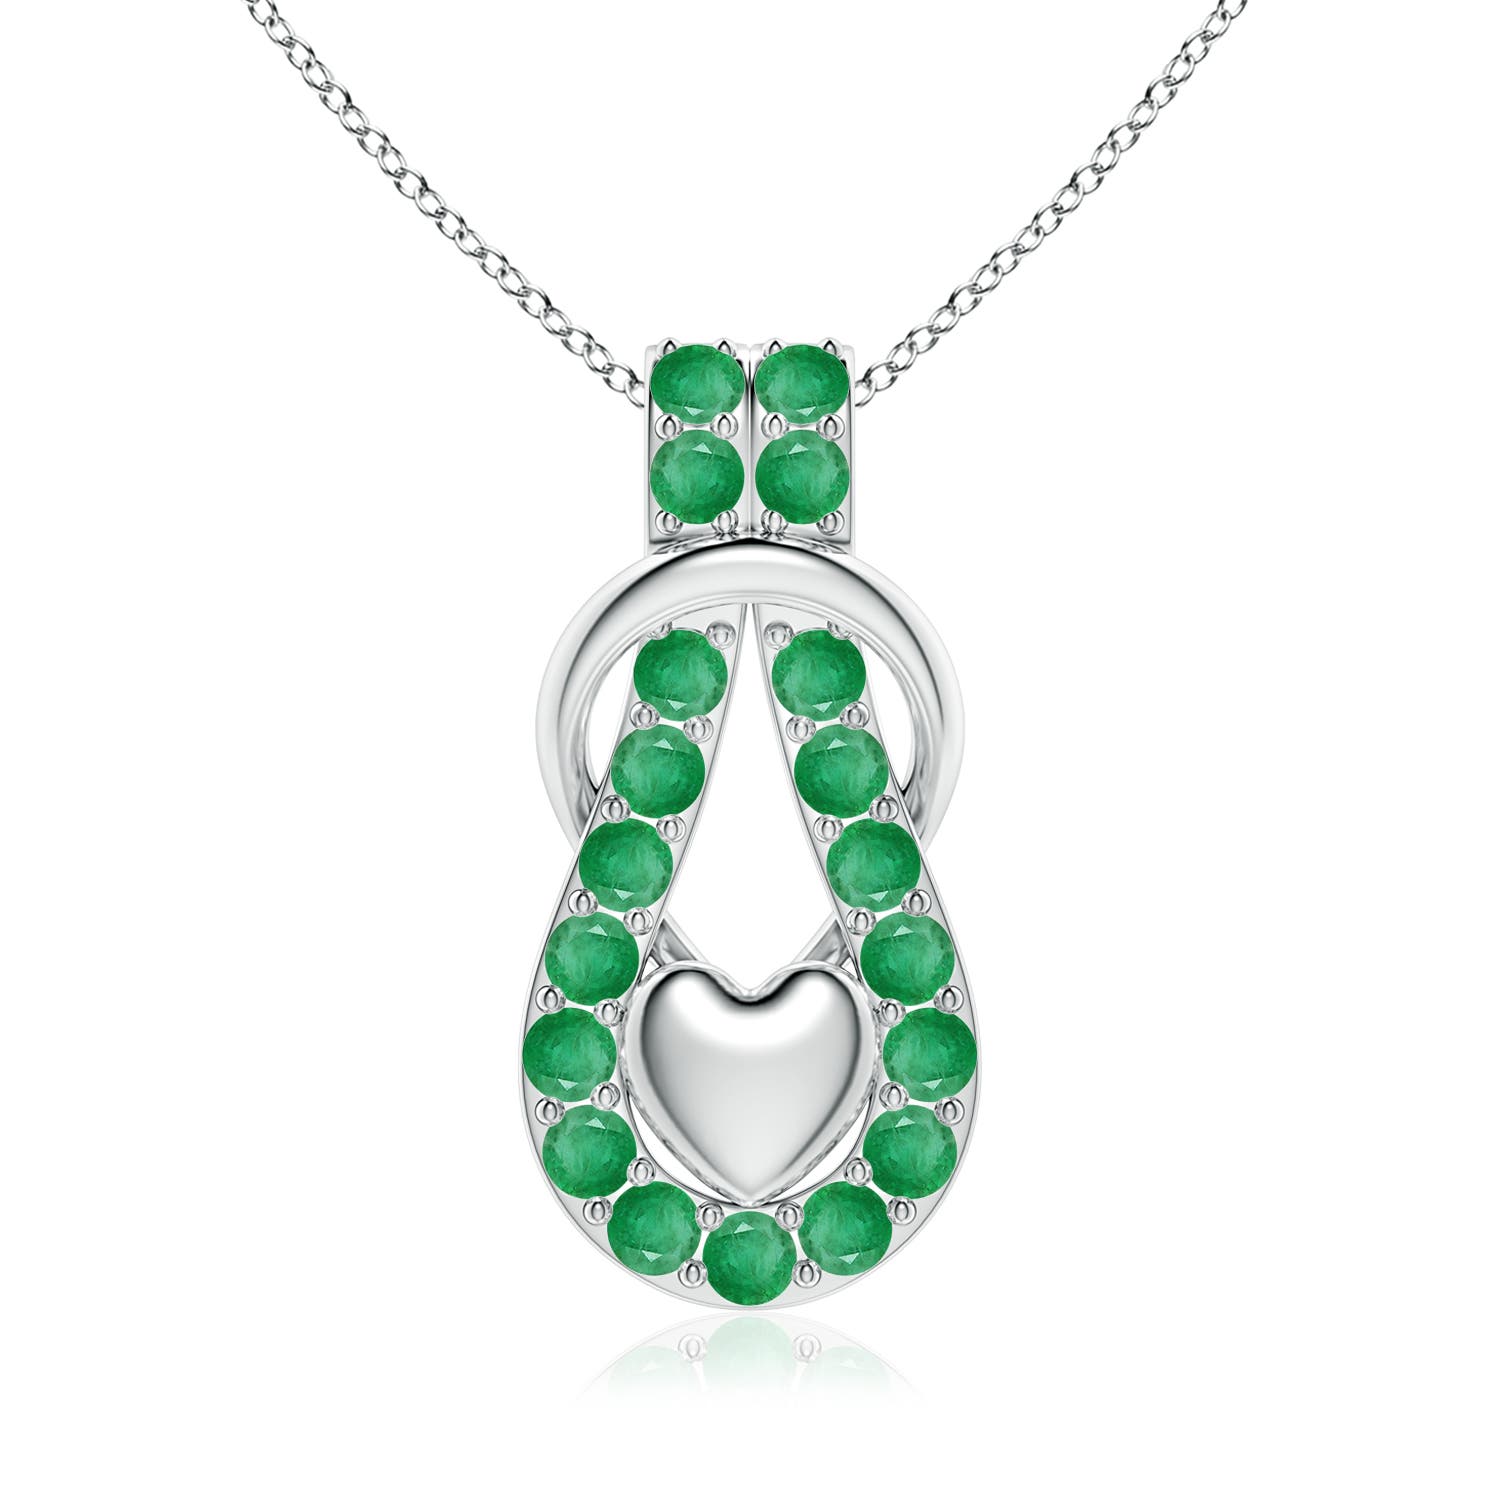 A - Emerald / 2.85 CT / 18 KT White Gold